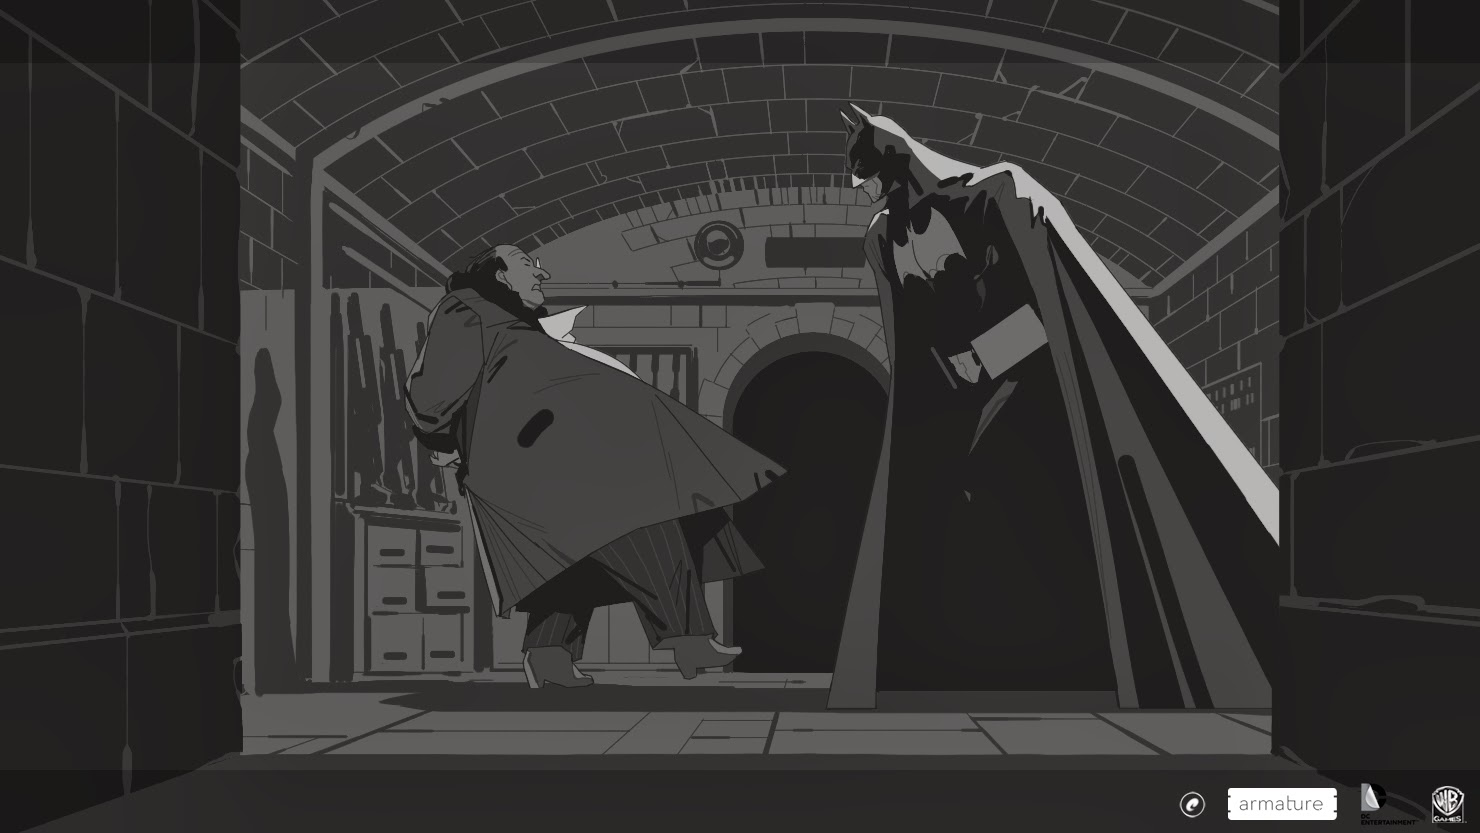 Fine Art: If A Batman Game Looked Like This, I Would Never Stop Playing